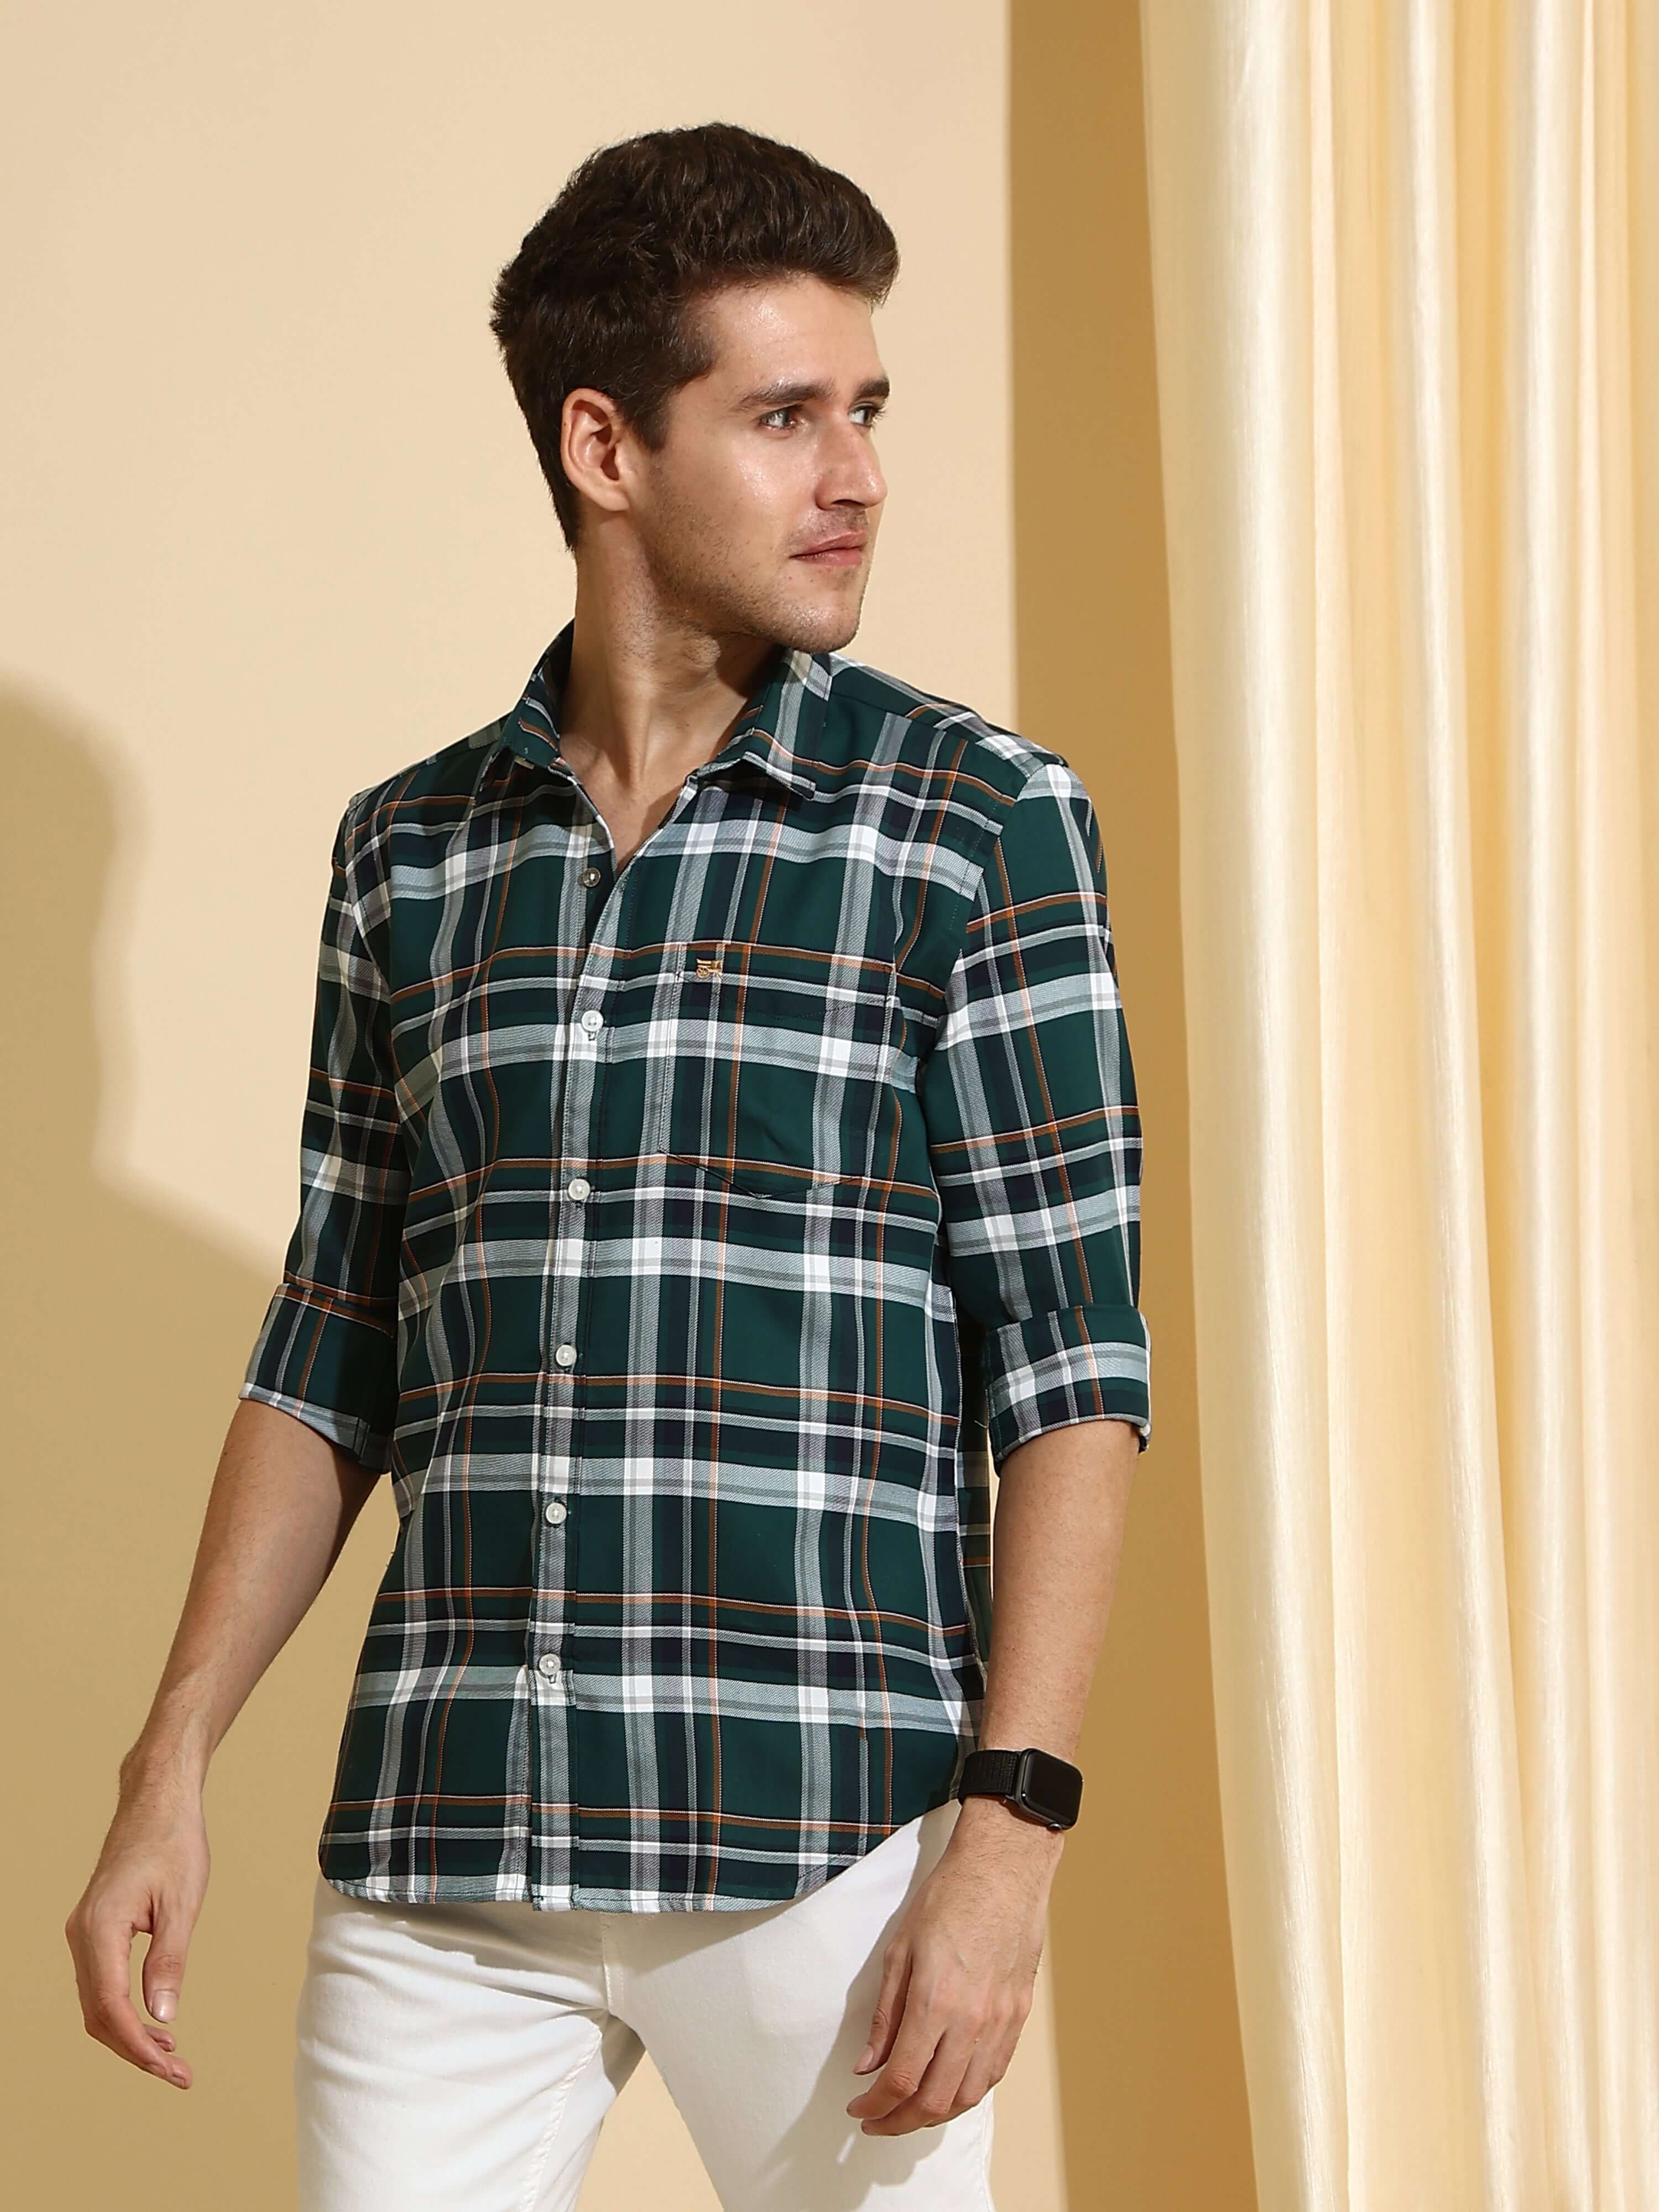 Teal & Green casual check full sleeves shirt shop online at Estilocus. • Full-sleeve shirt • Cut and sew placket • Regular collar • Double button square cuff. • Single pocket with logo embroidery • Curved hemline • All double-needle construction, finest q